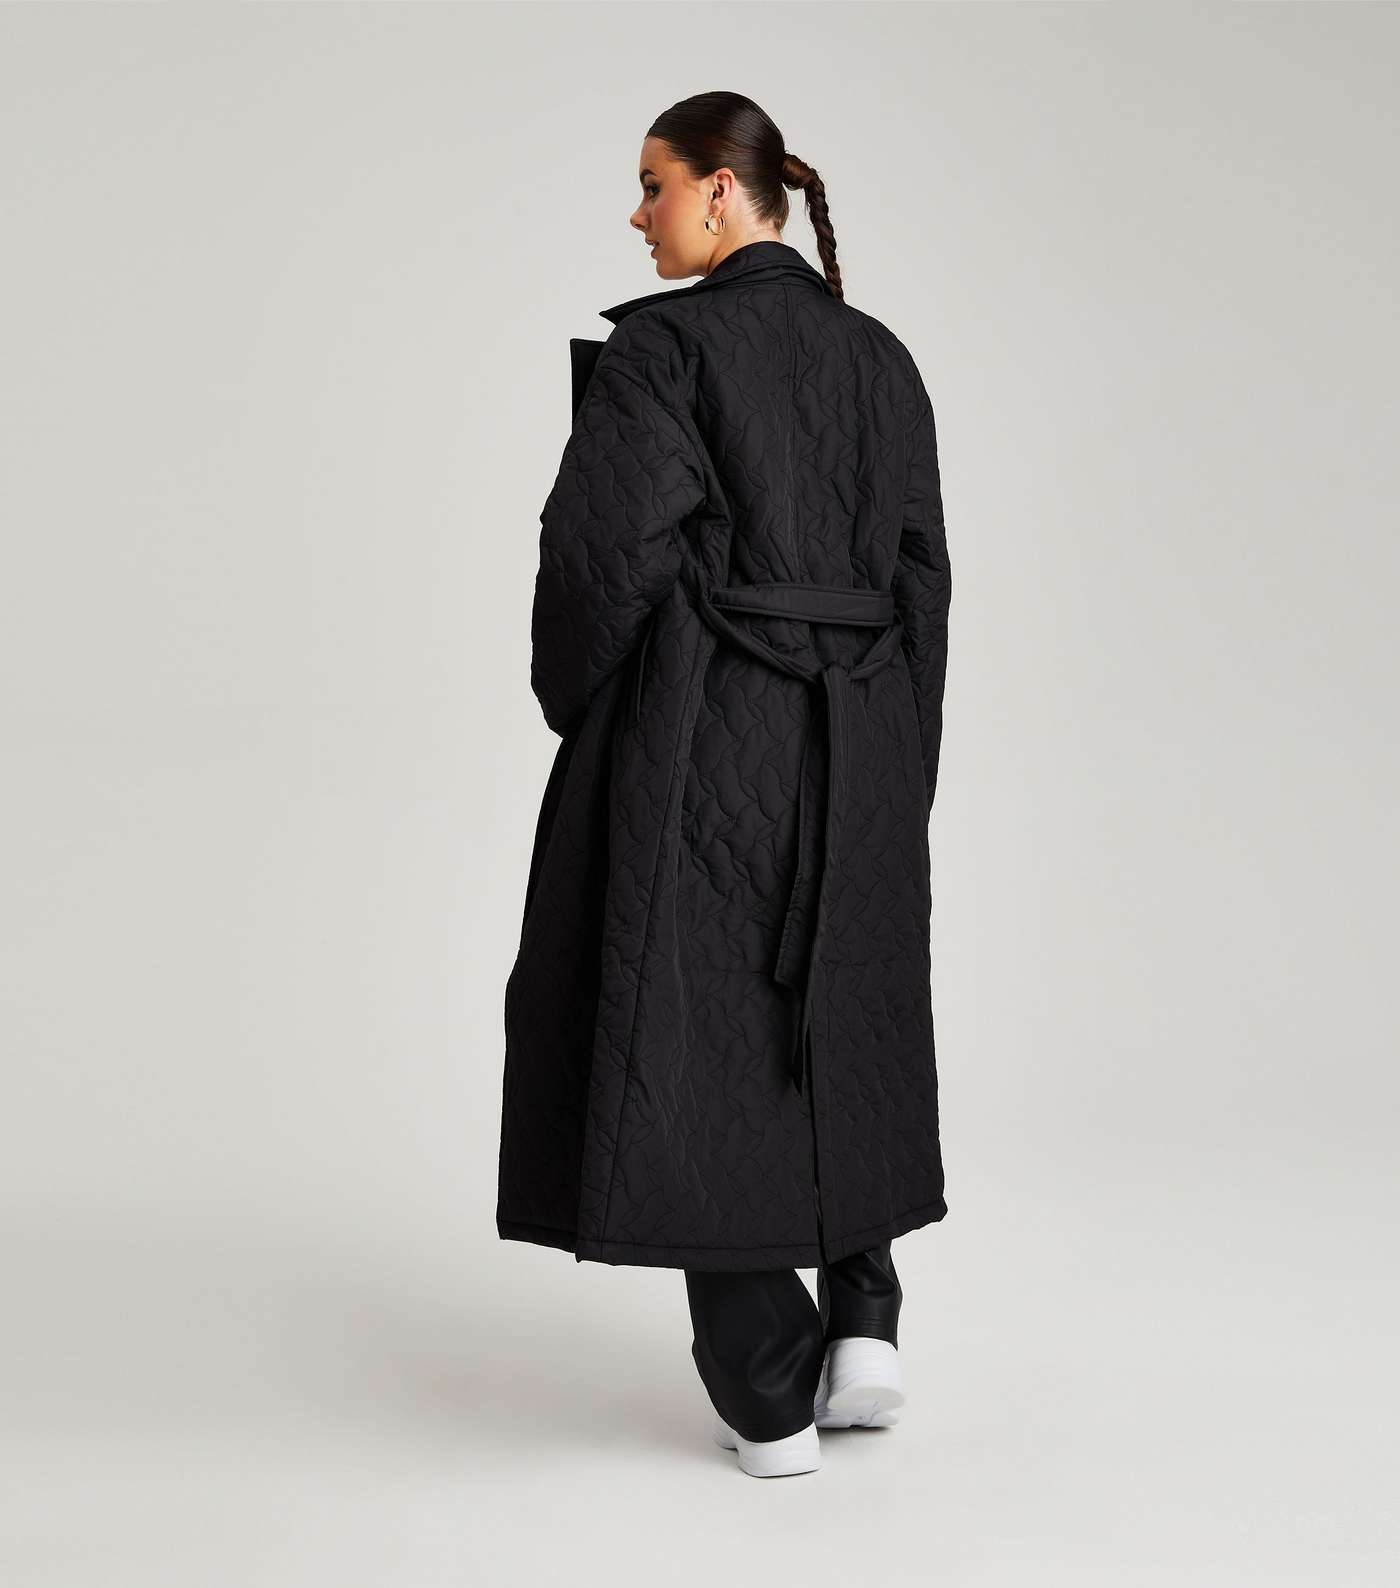 Urban Bliss Black Quilted Revere Collar Belted Long Oversized Puffer Jacket Image 4